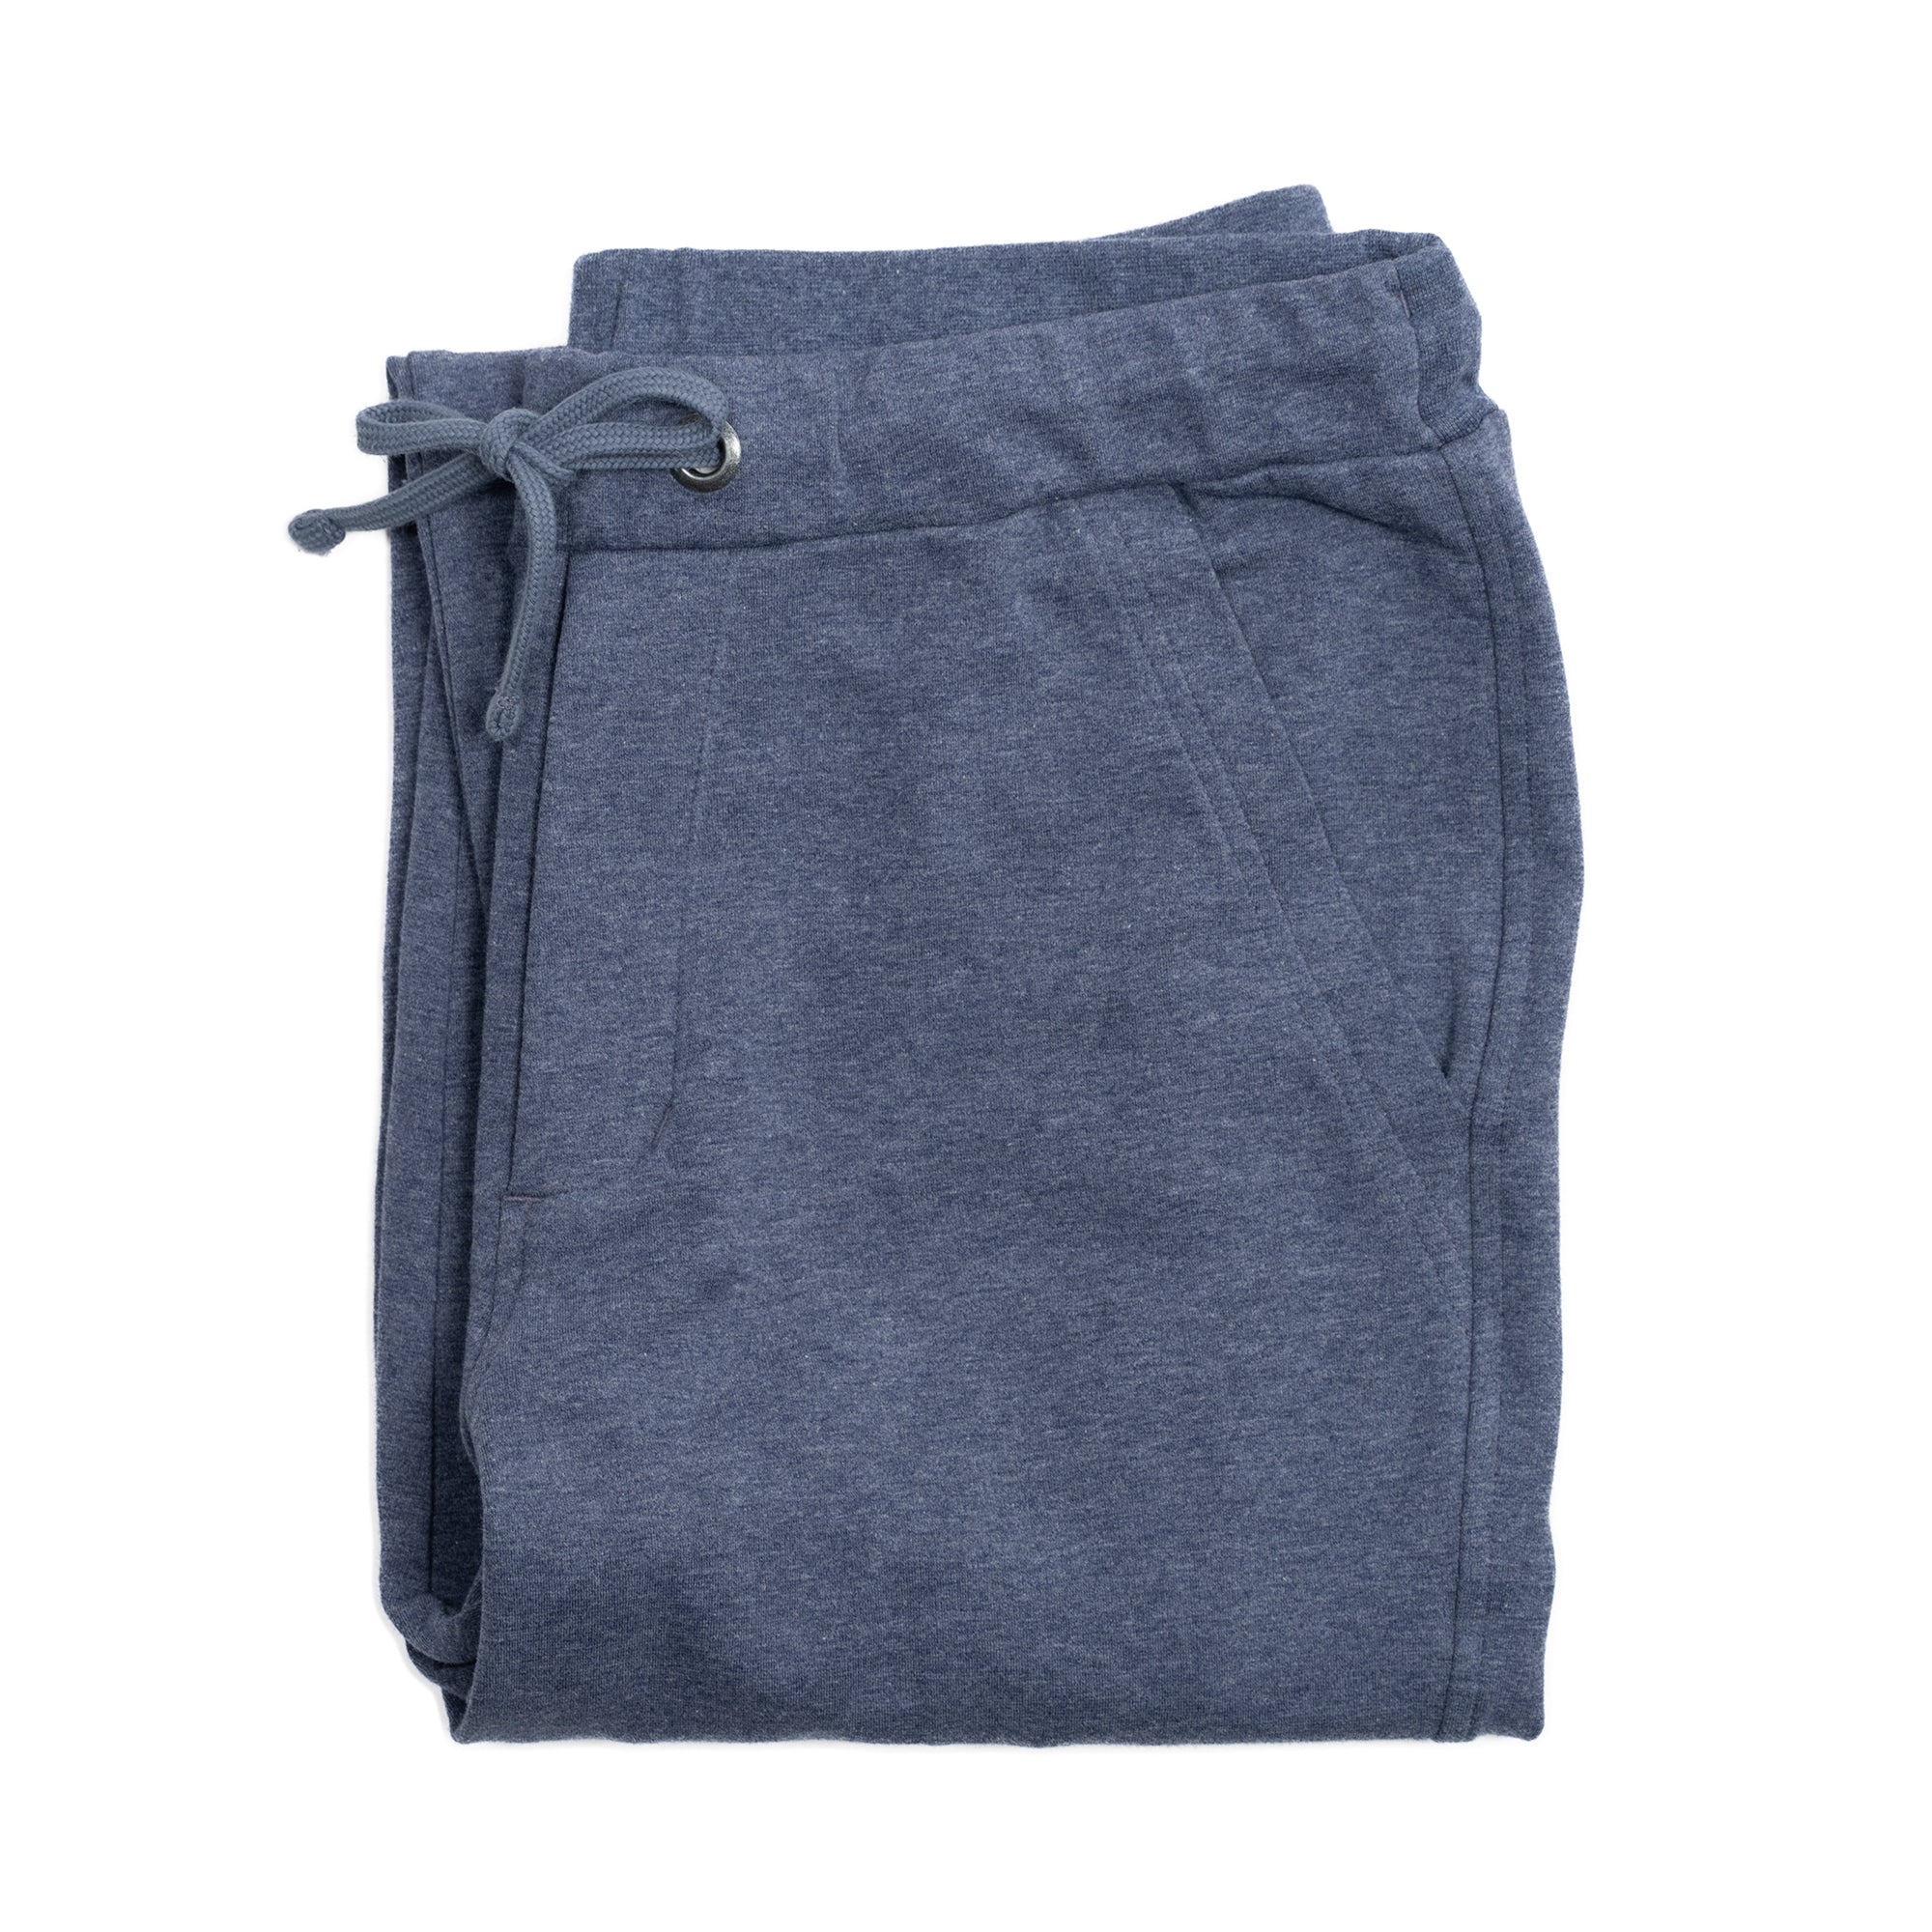 All Day Sweatpants - Heather Navy